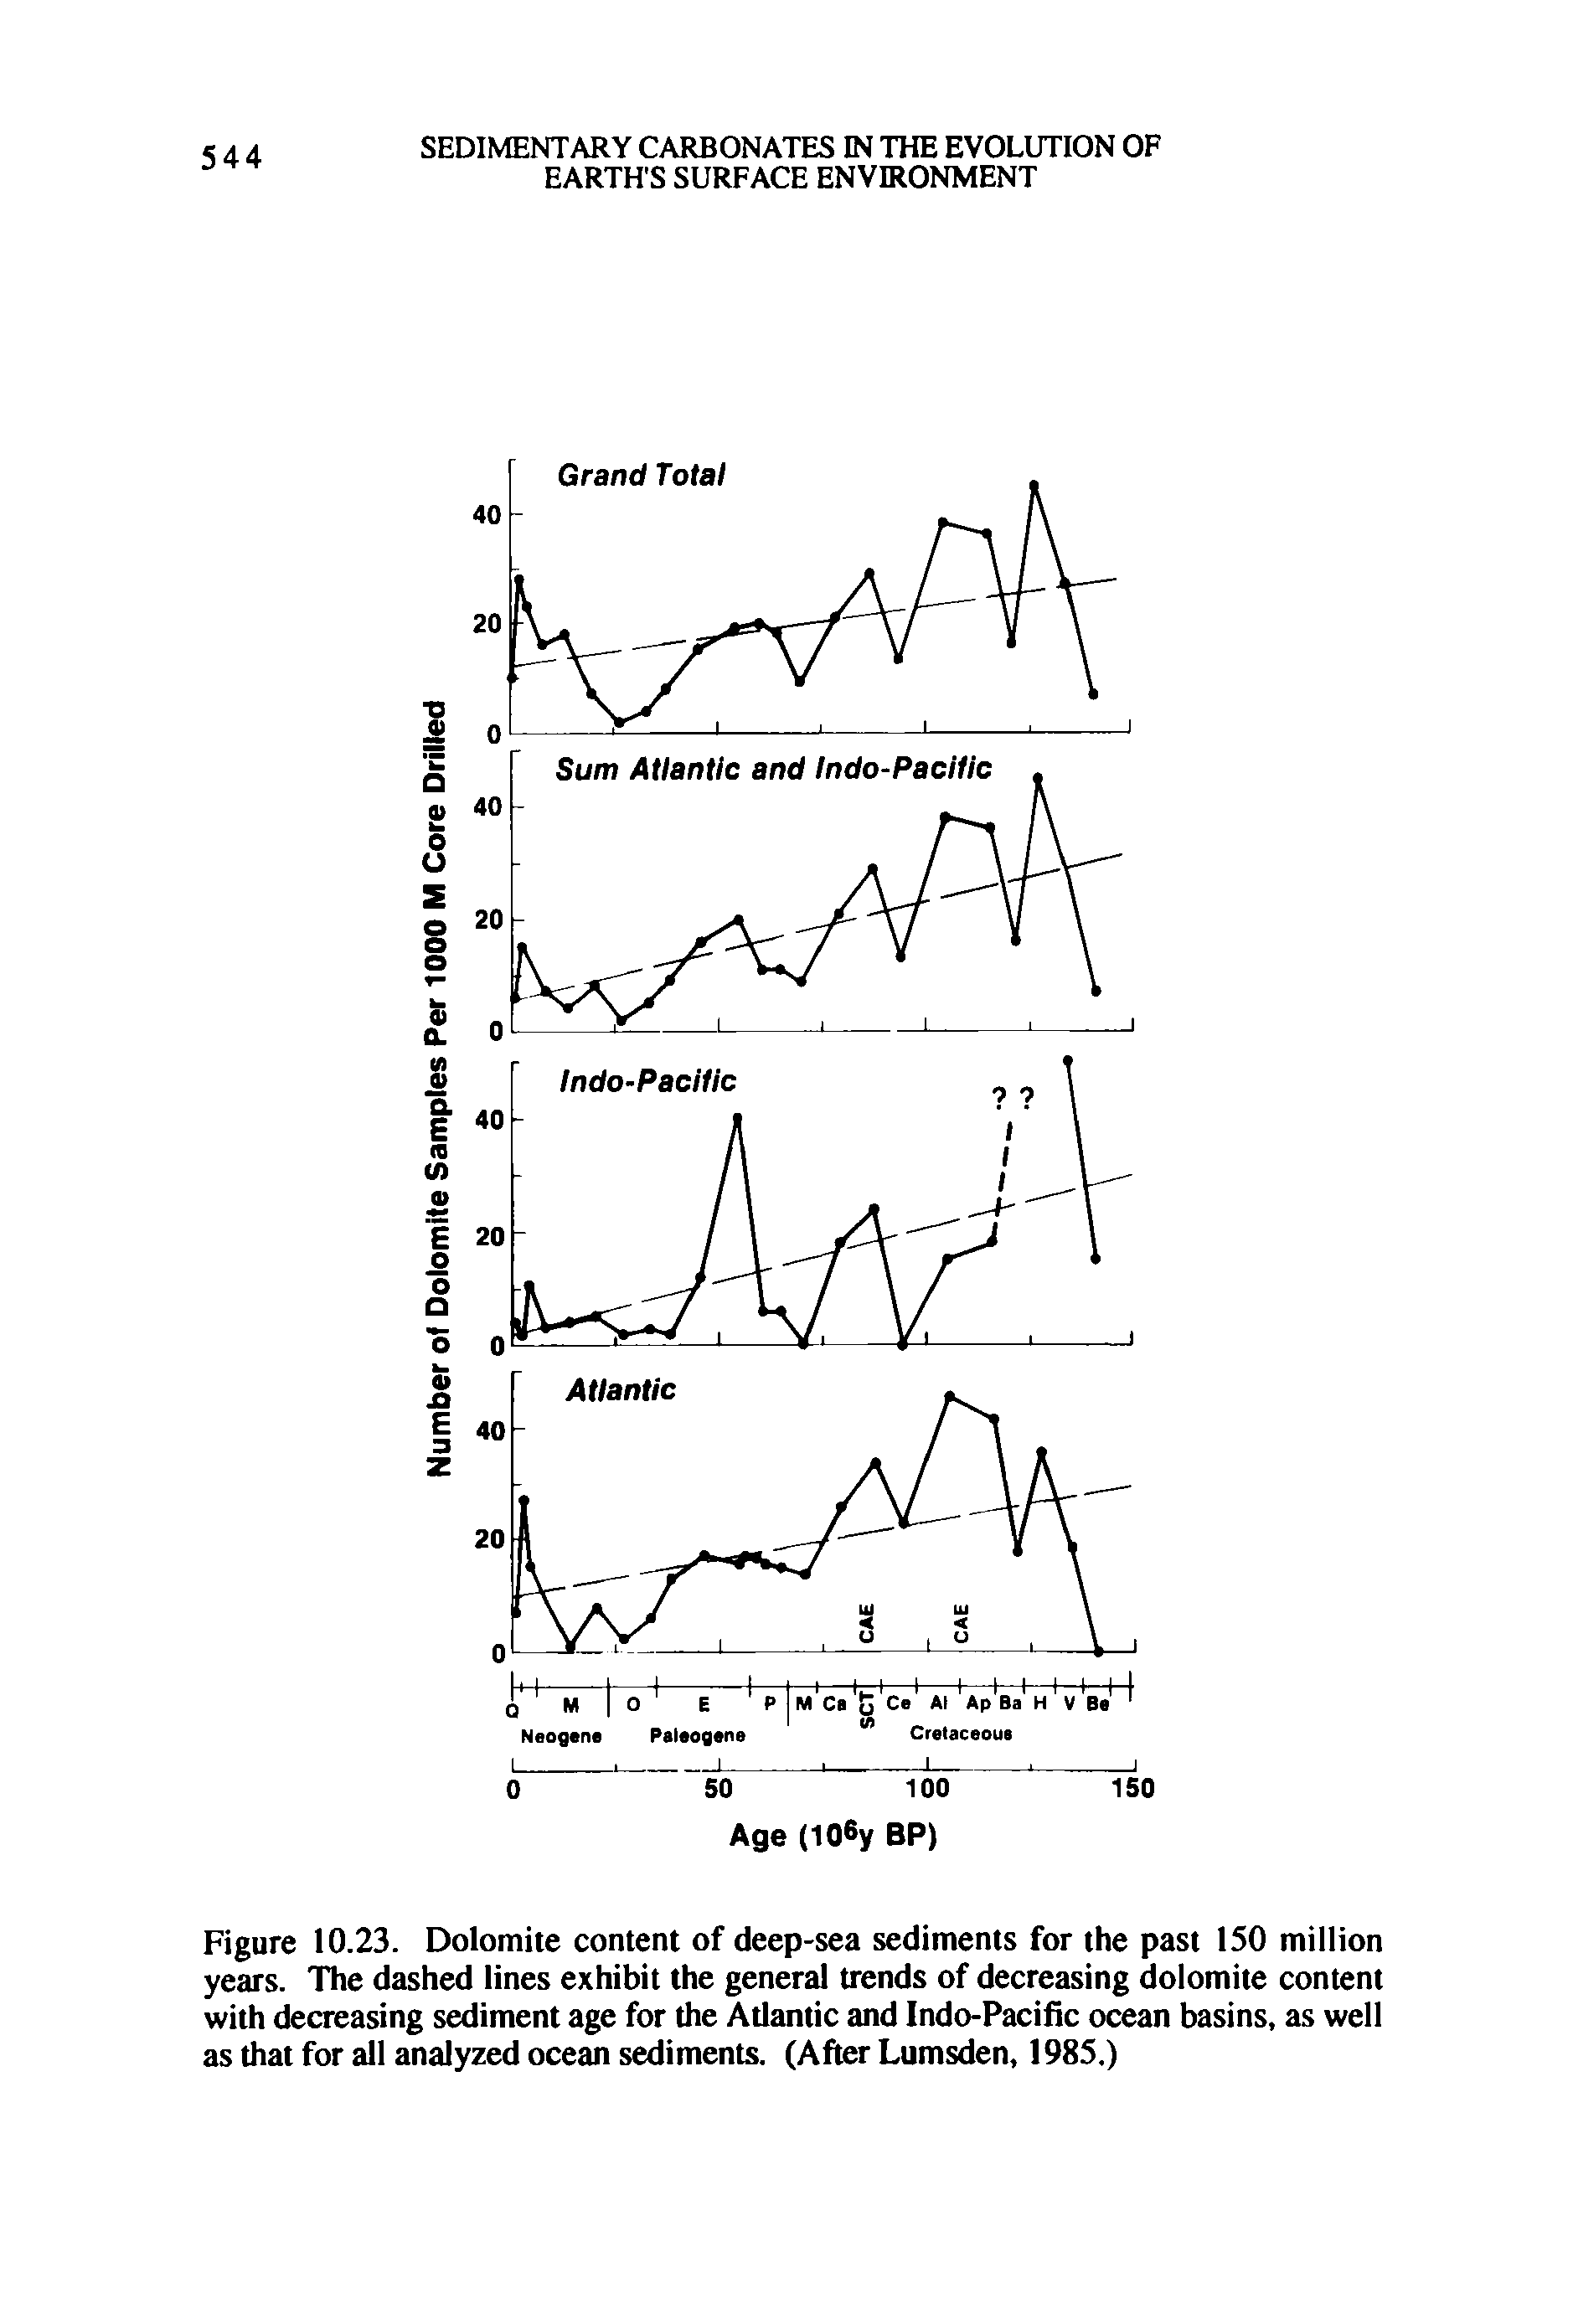 Figure 10.23. Dolomite content of deep-sea sediments for the past 150 million years. The dashed lines exhibit the general trends of decreasing dolomite content with decreasing sediment age for the Adantic and Indo-Pacific ocean basins, as well as that for all analyzed ocean sediments. (After Lumsden, 1985.)...